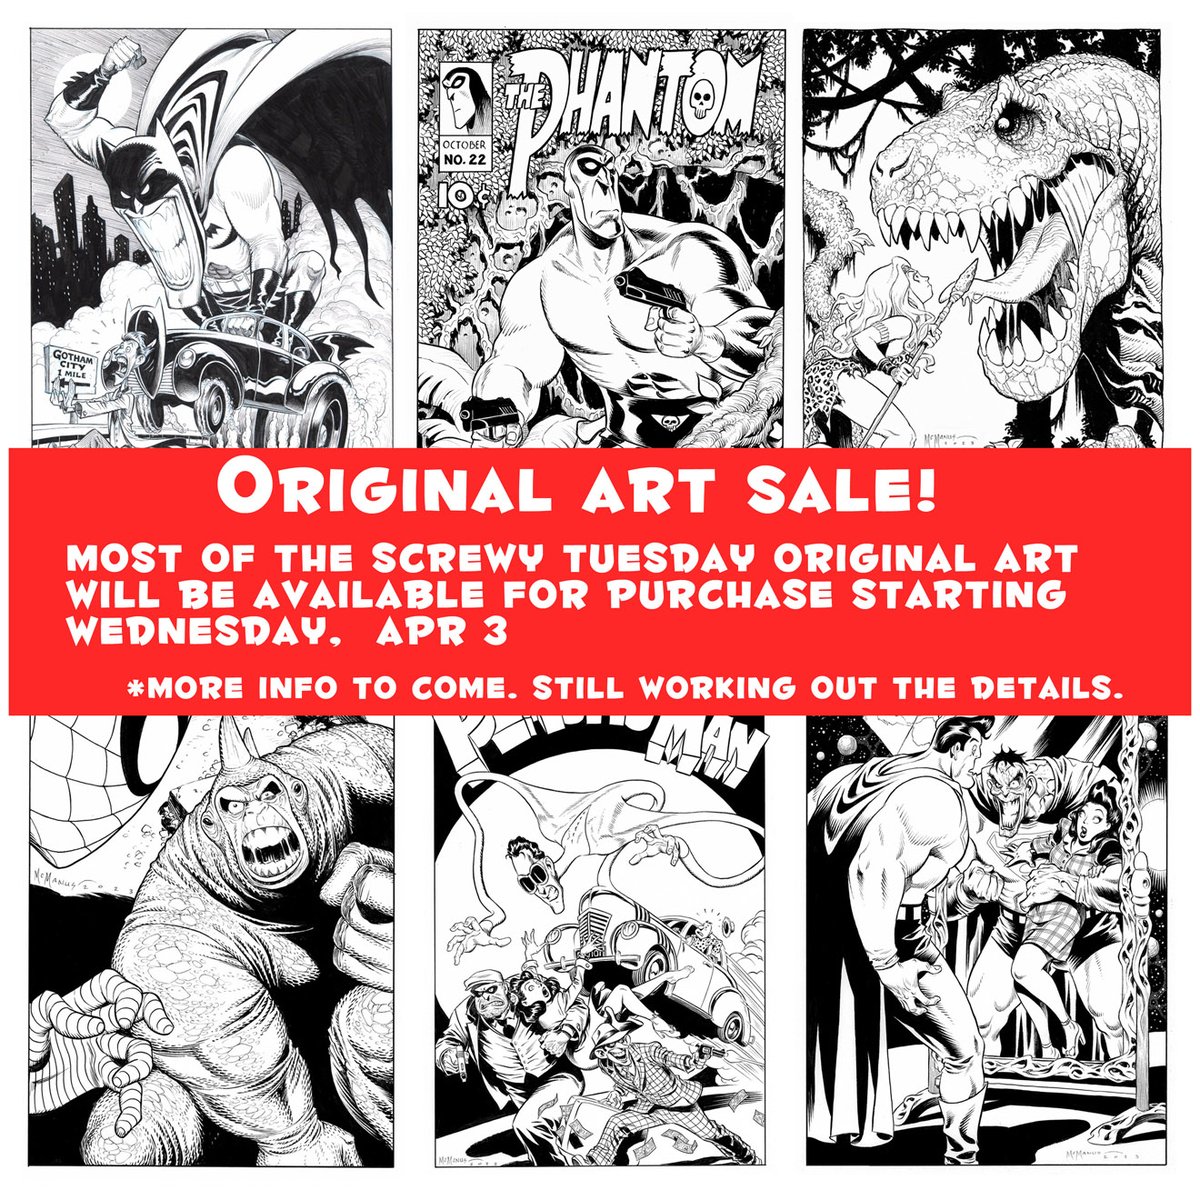 hey folks, if anyone is interested in picking up one of these sweet screwy tuesday pics, they will be available wednesday through comicarthouse.com #screwytuesday #illustration #originalart #comicart #penandink